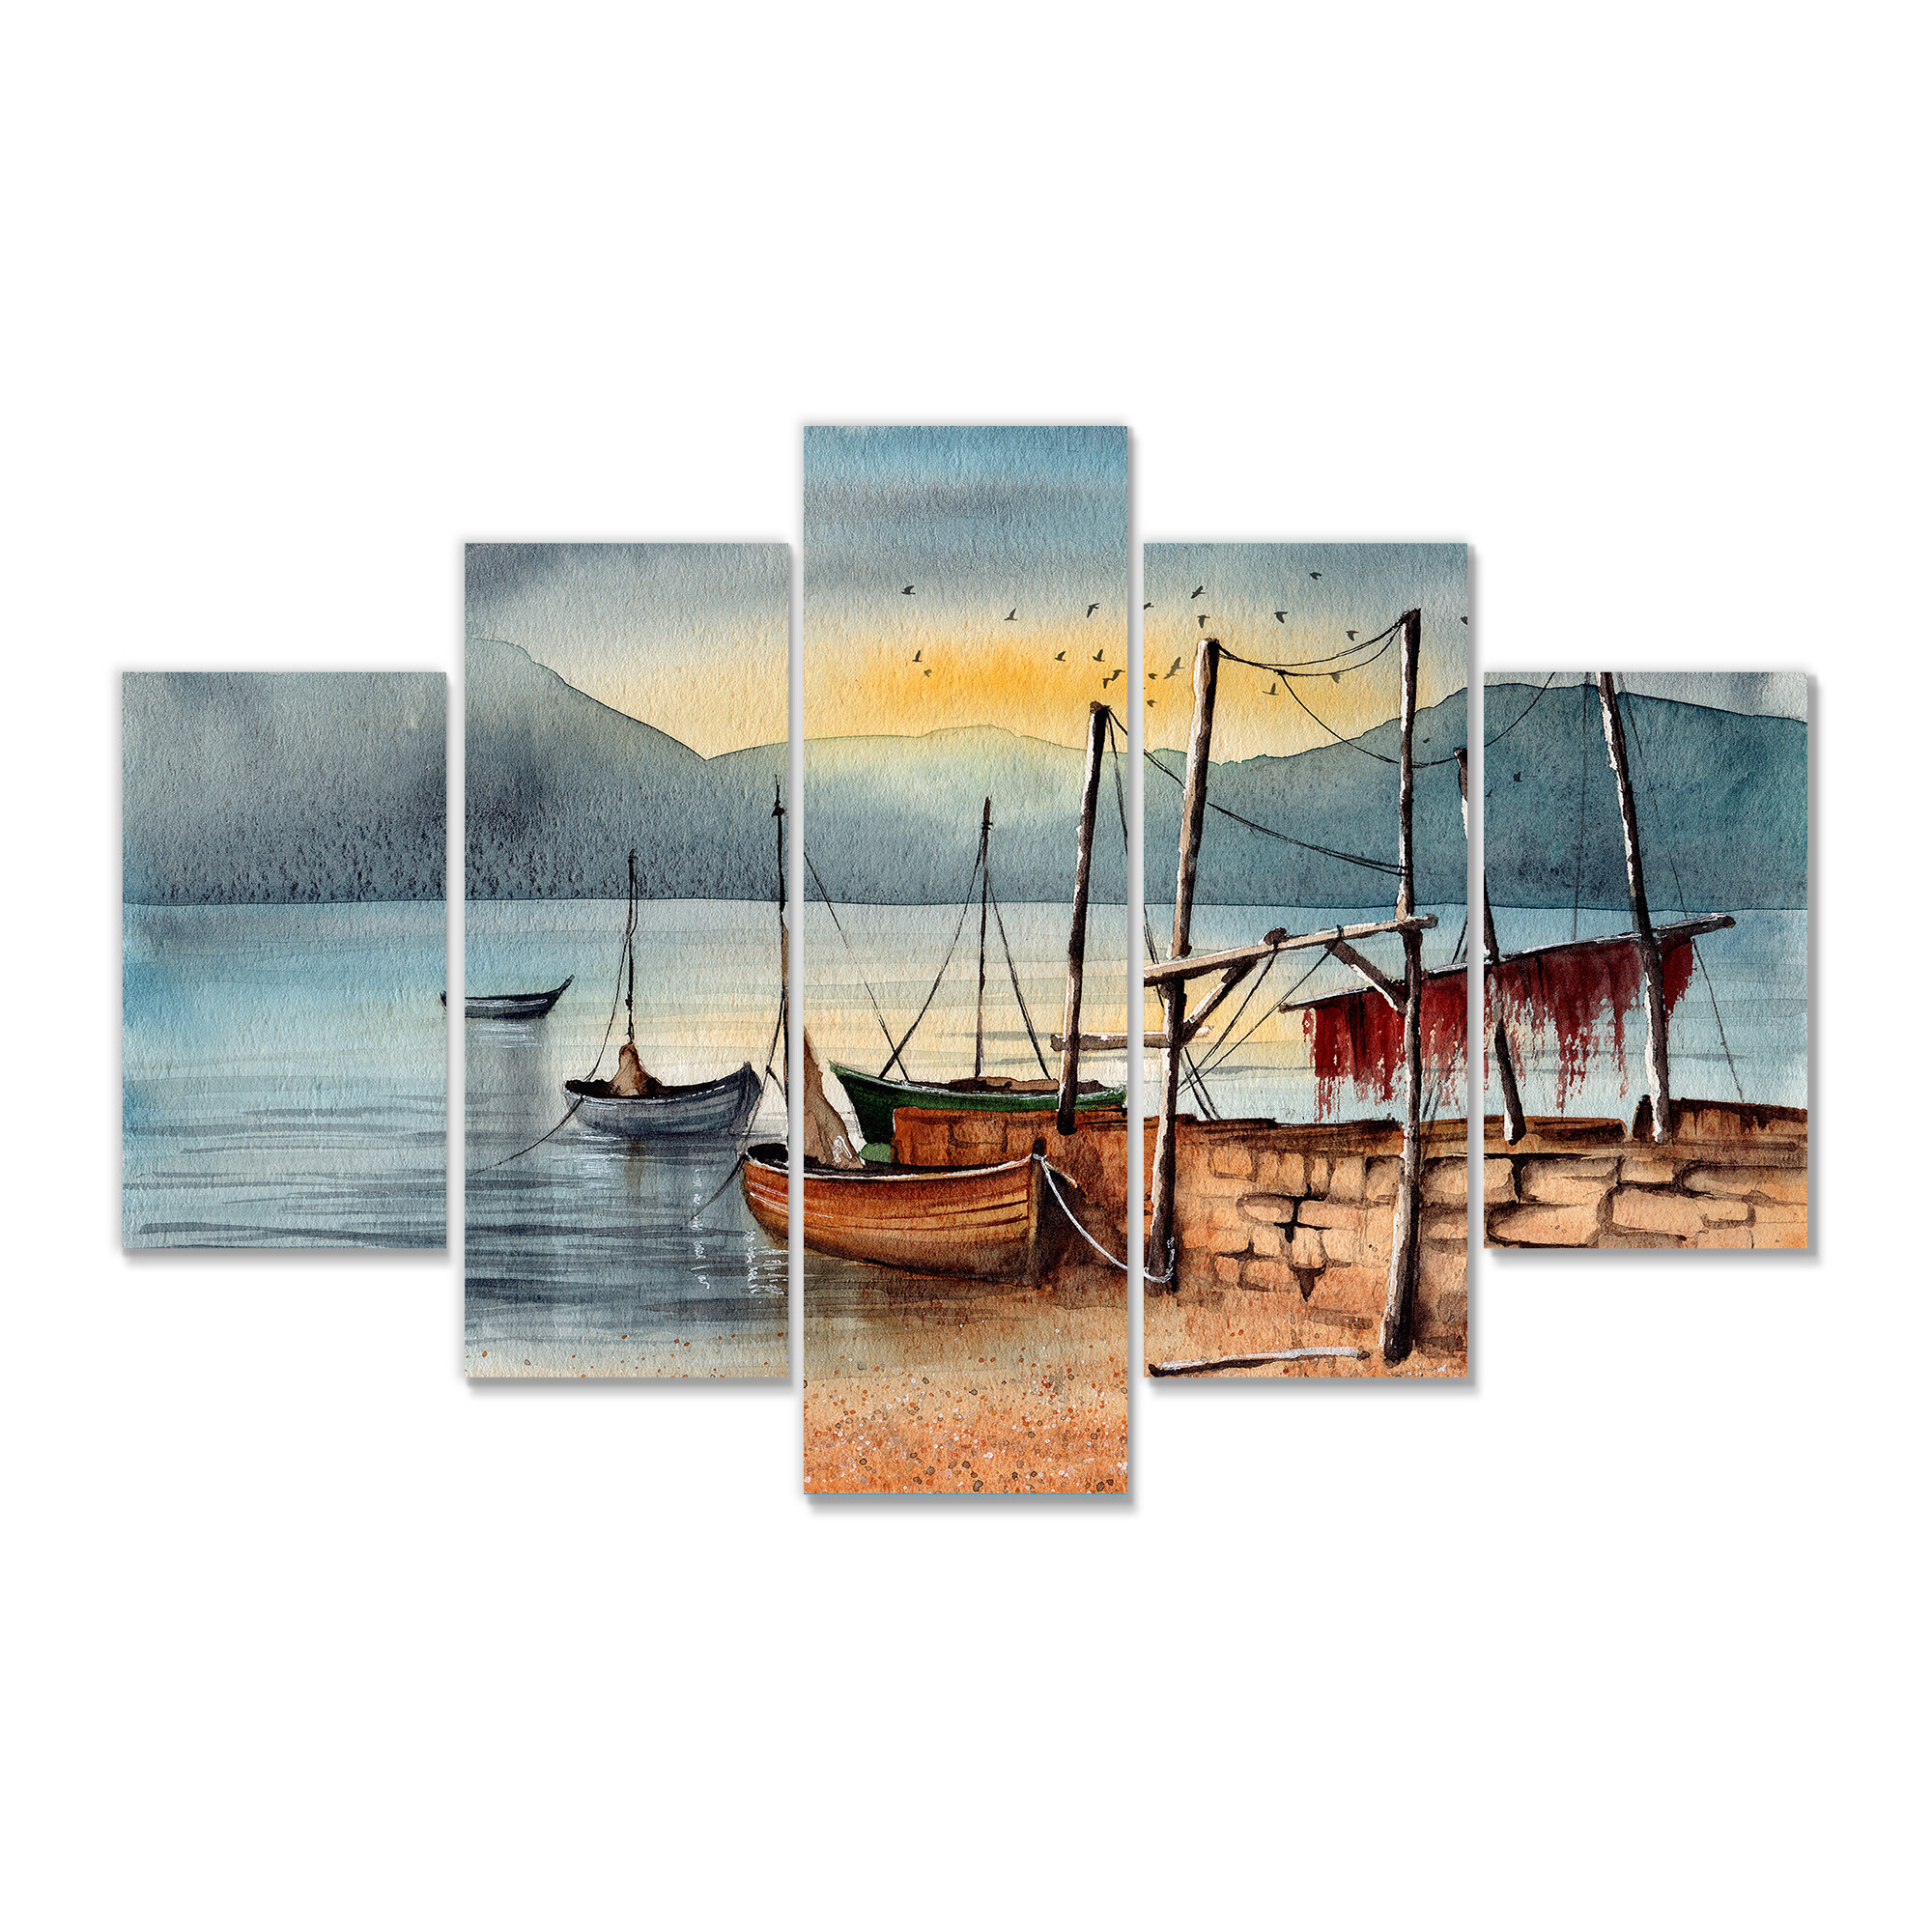 Several Fishing Boats In The Harbor Of The Lake II On Canvas 5 Pieces  Painting